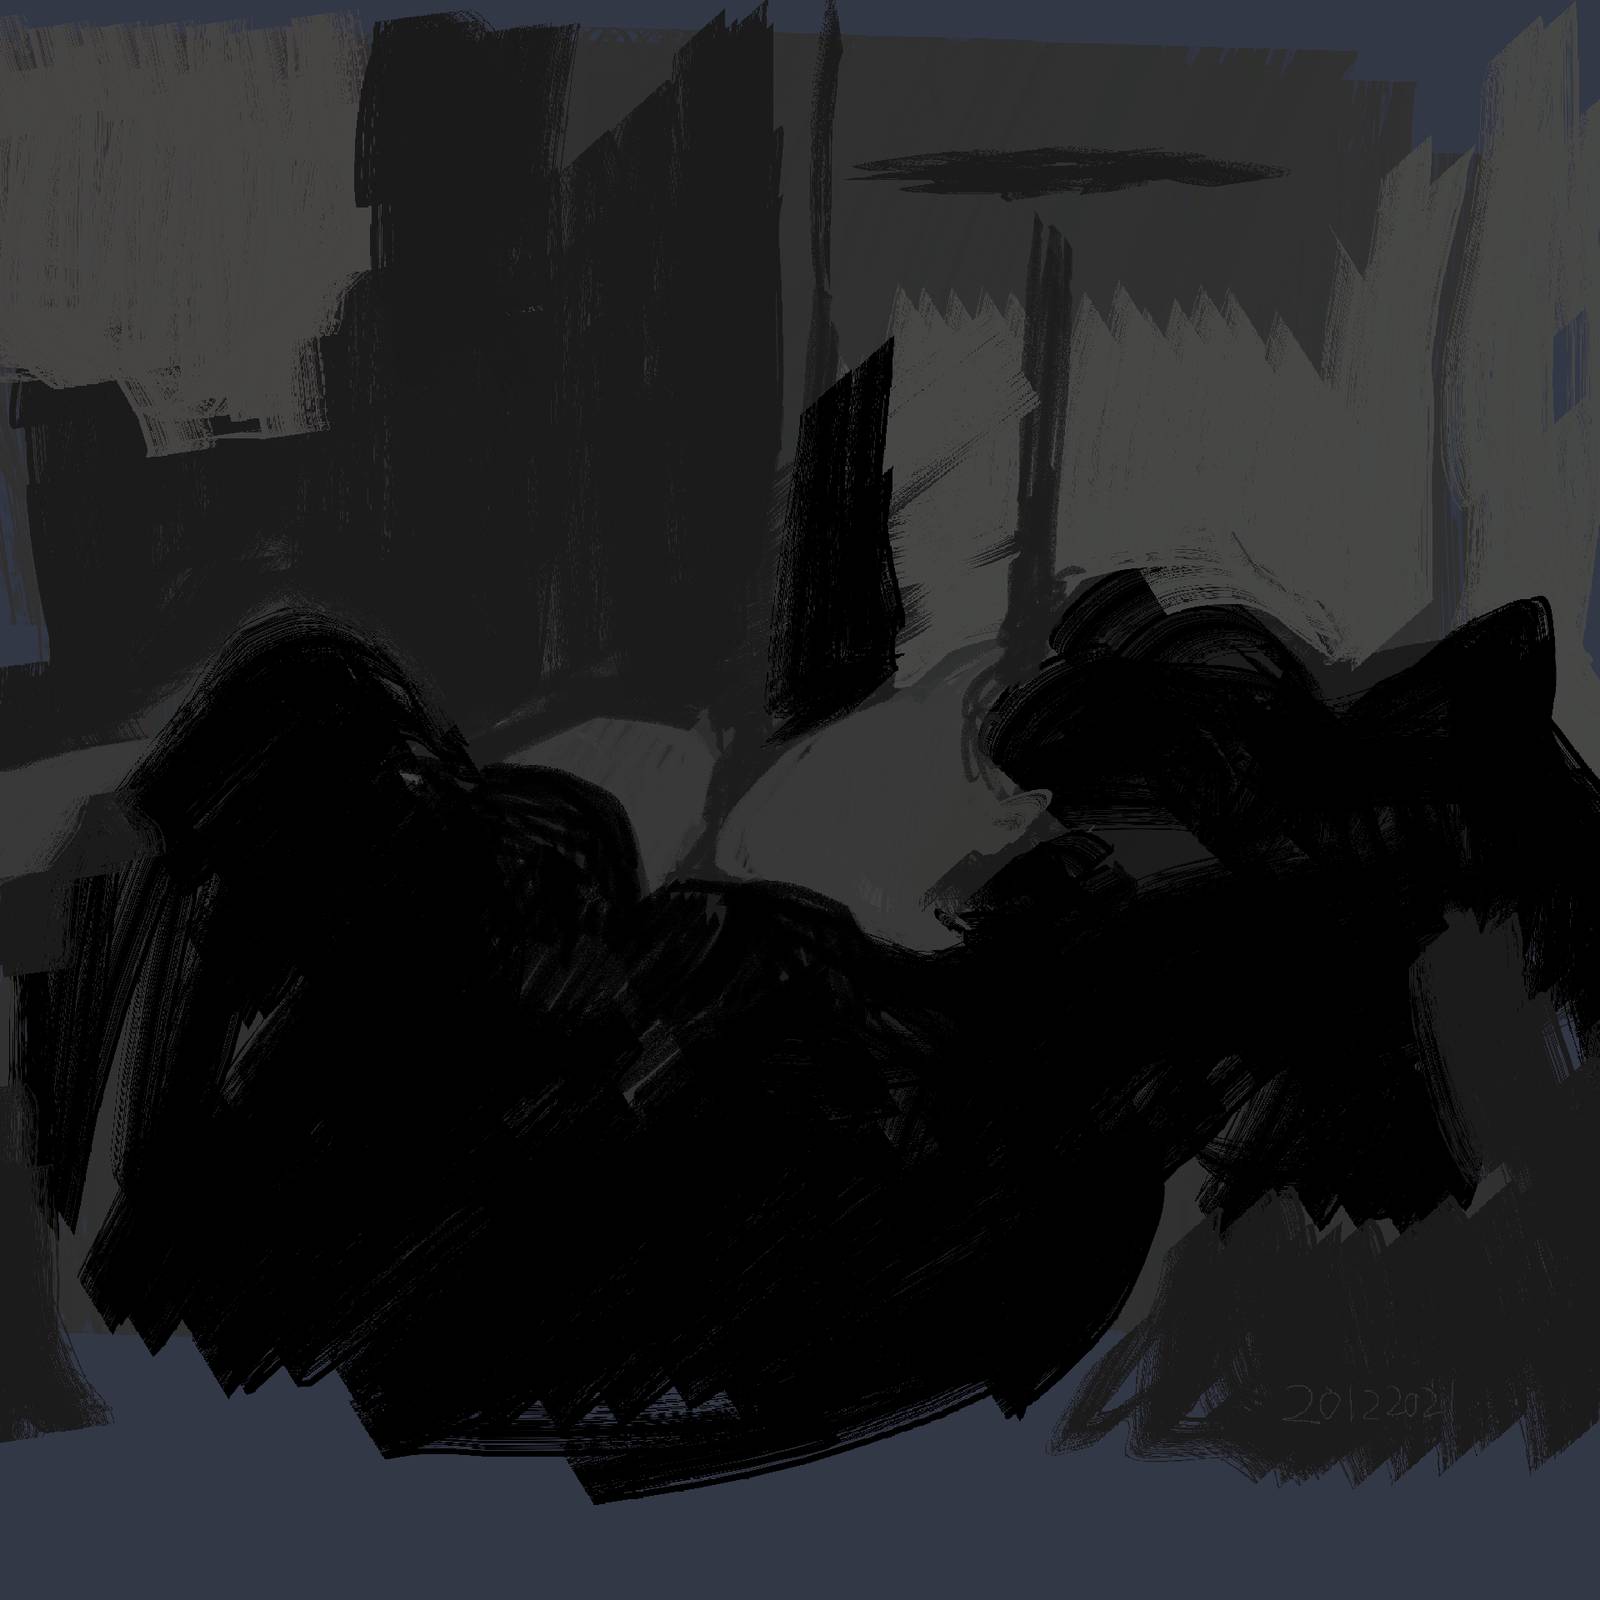 Dark painting of a person lying down, facing away